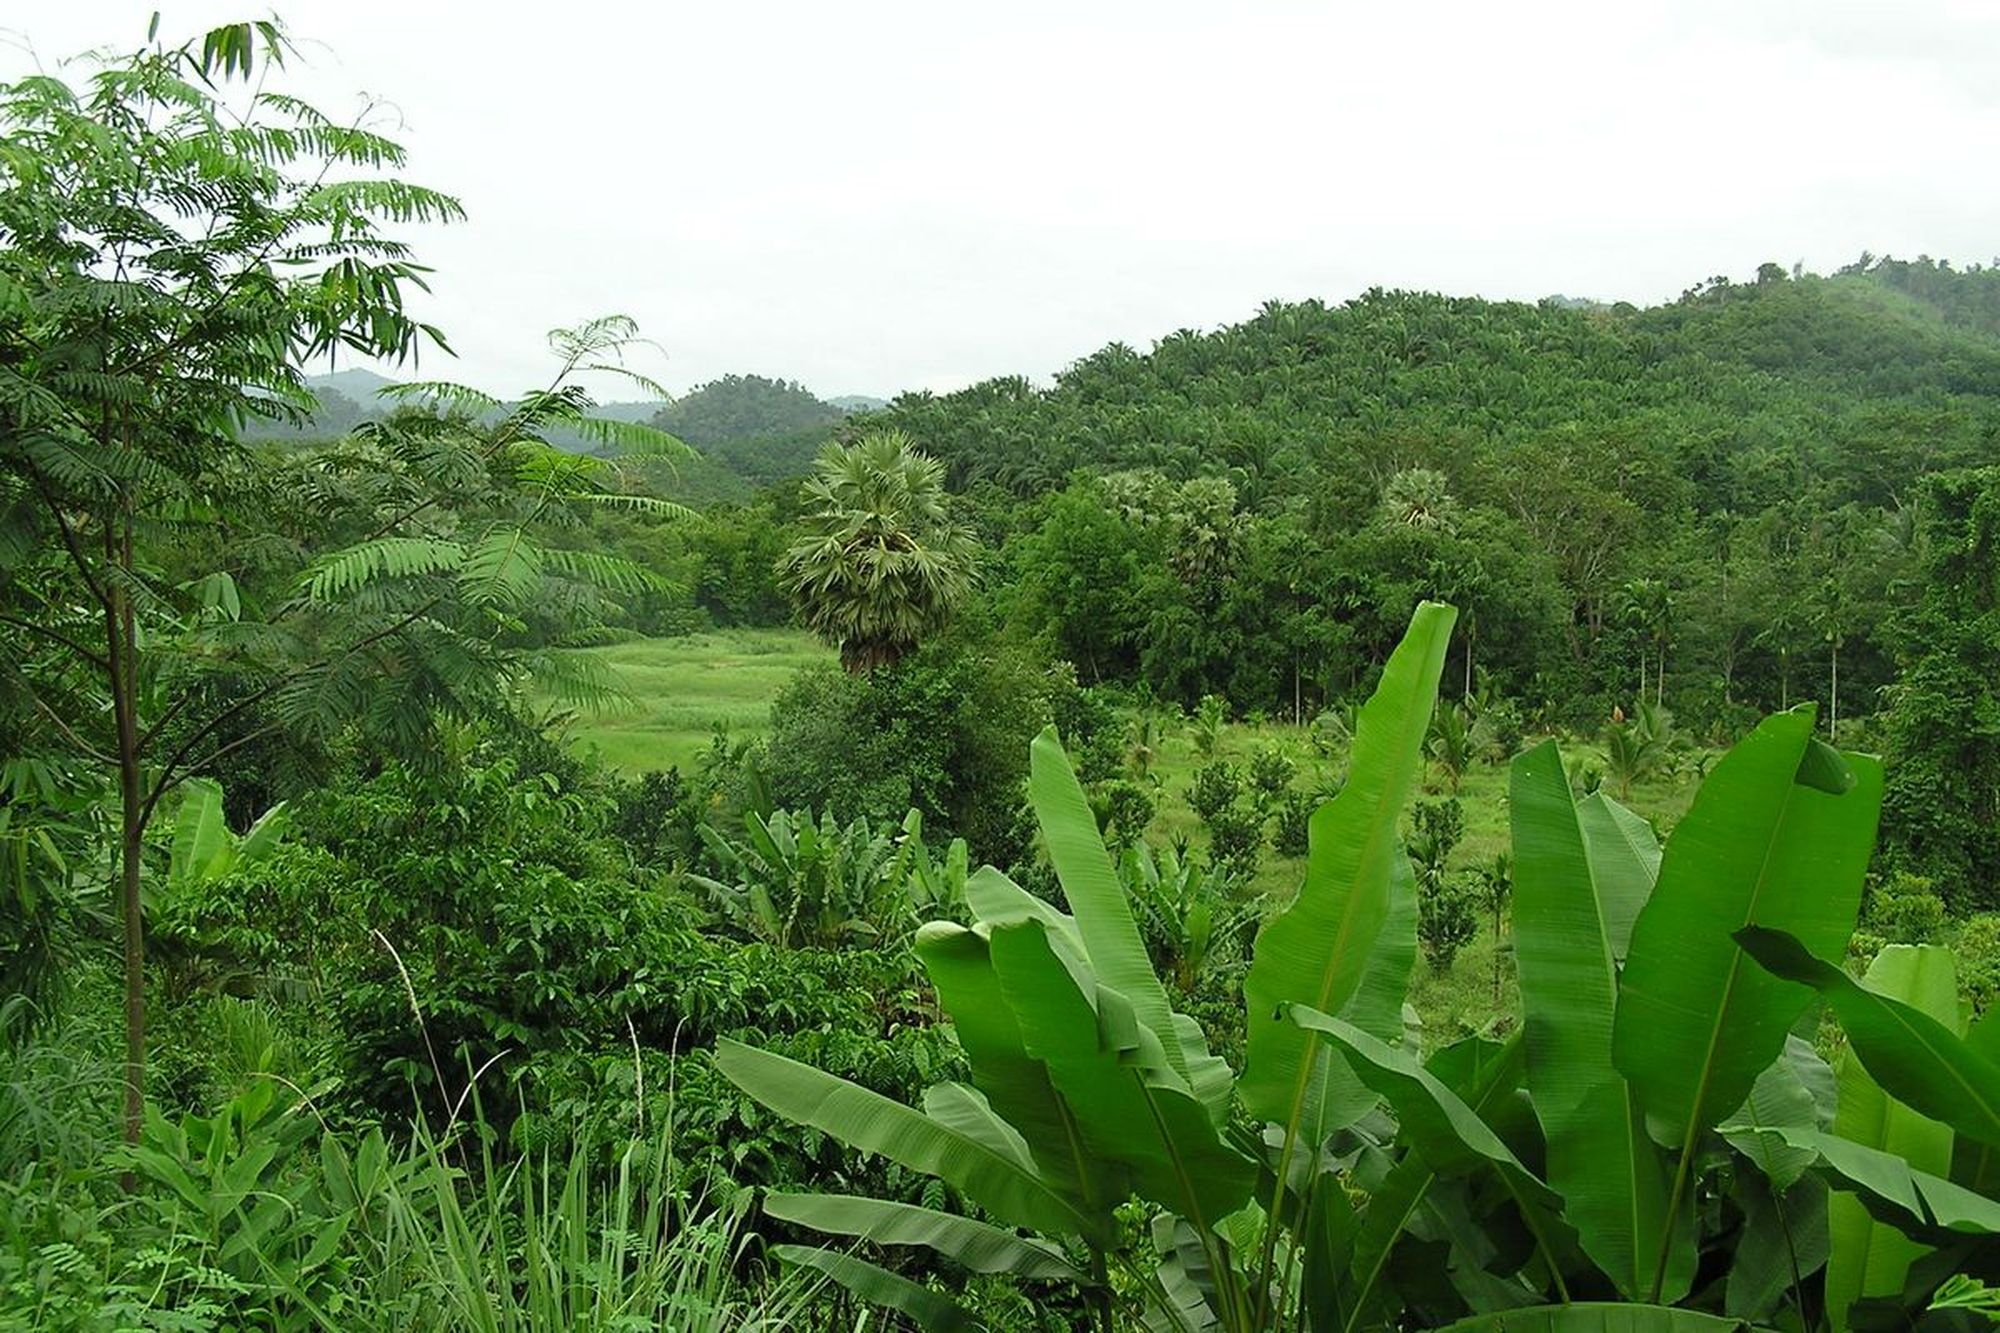 Dense jungle with clearing below.